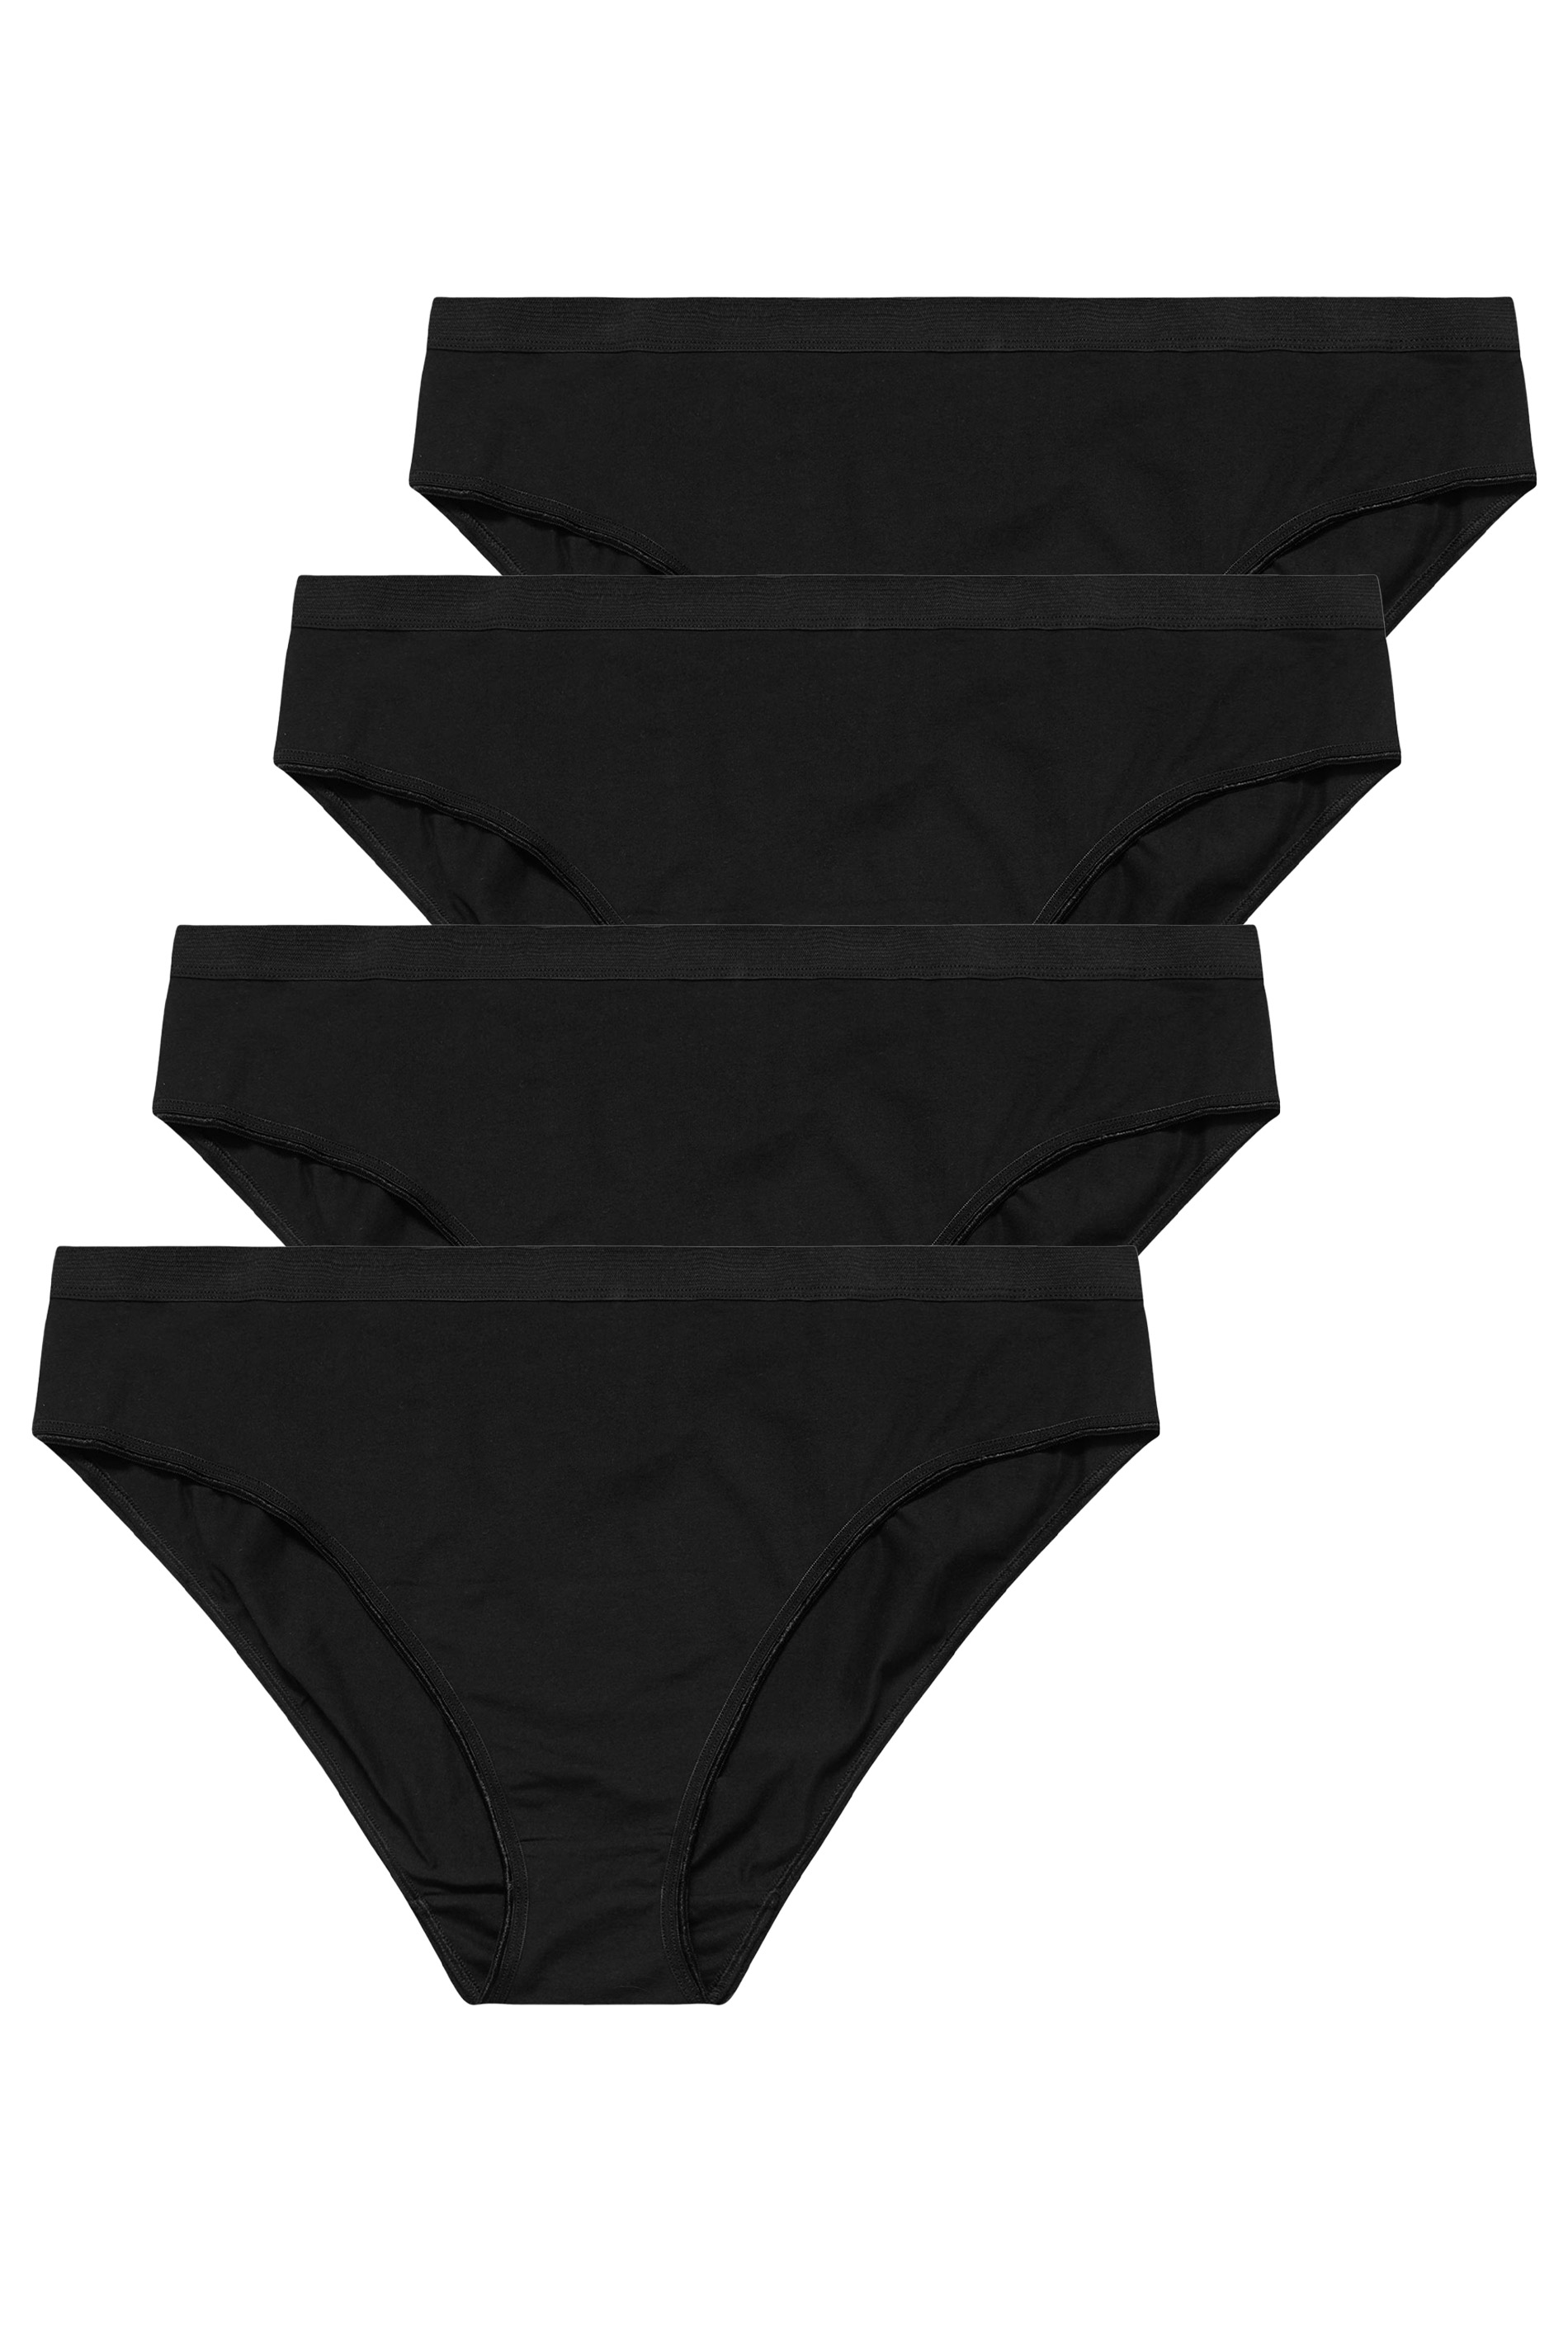 YOURS 4 PACK Plus Size Black Cotton Stretch High Leg Briefs | Yours ...